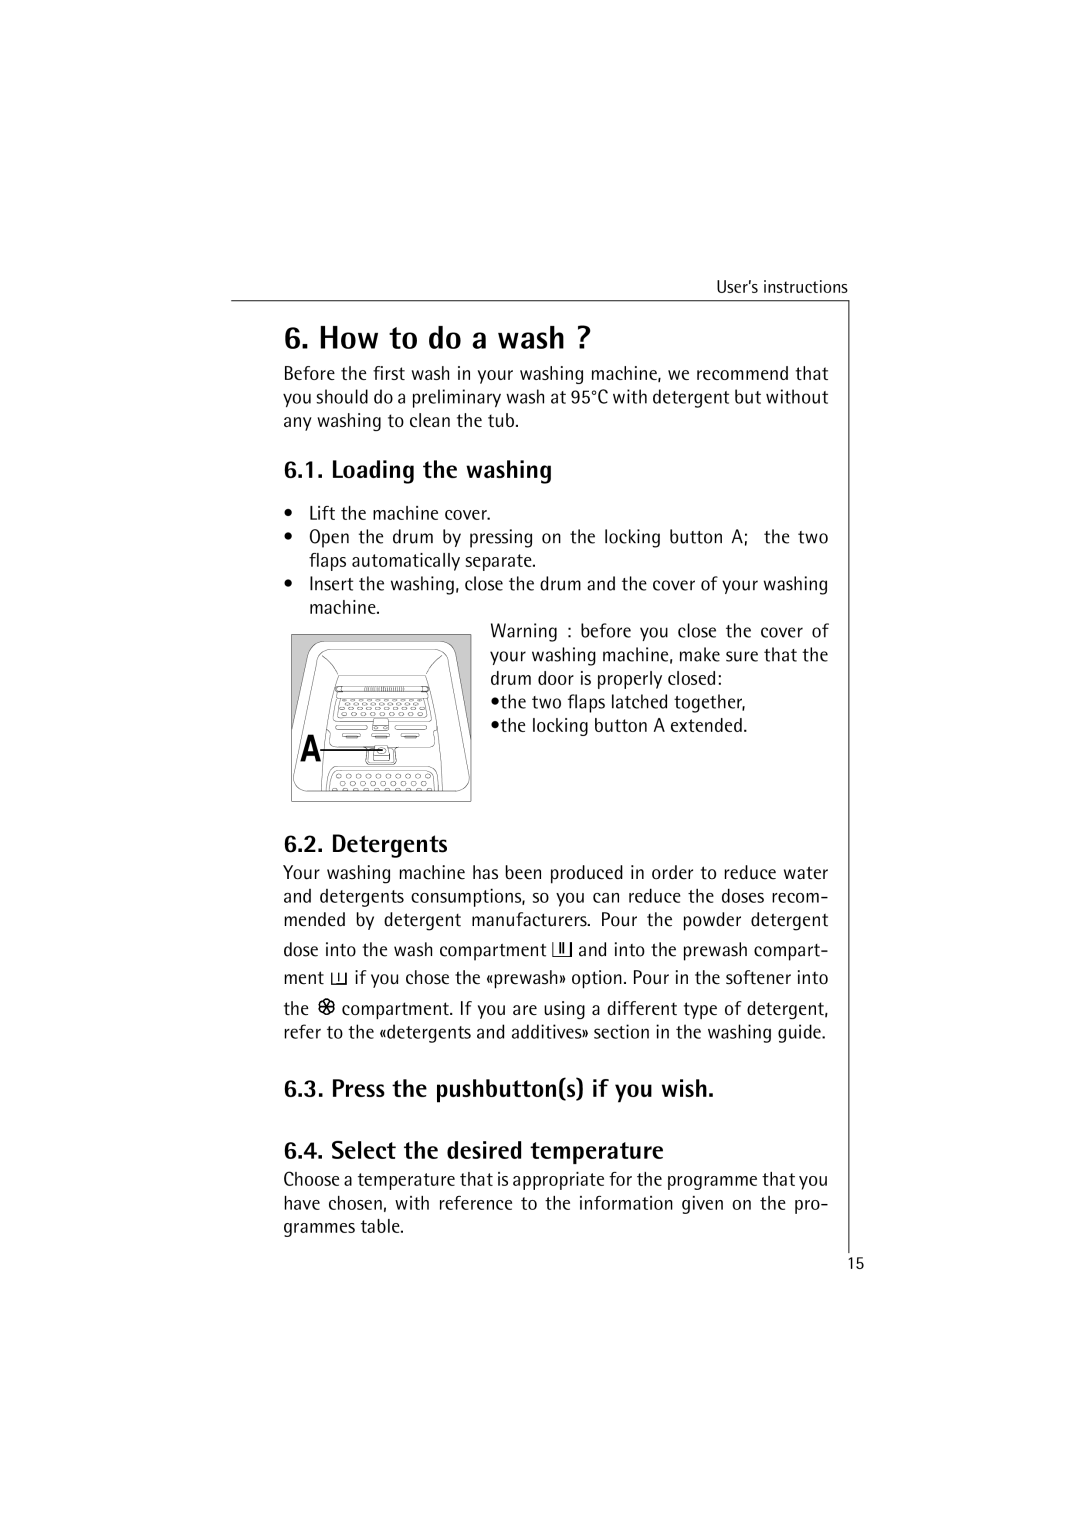 AEG 40850 manual How to do a wash ?, Loading the washing, Detergents 